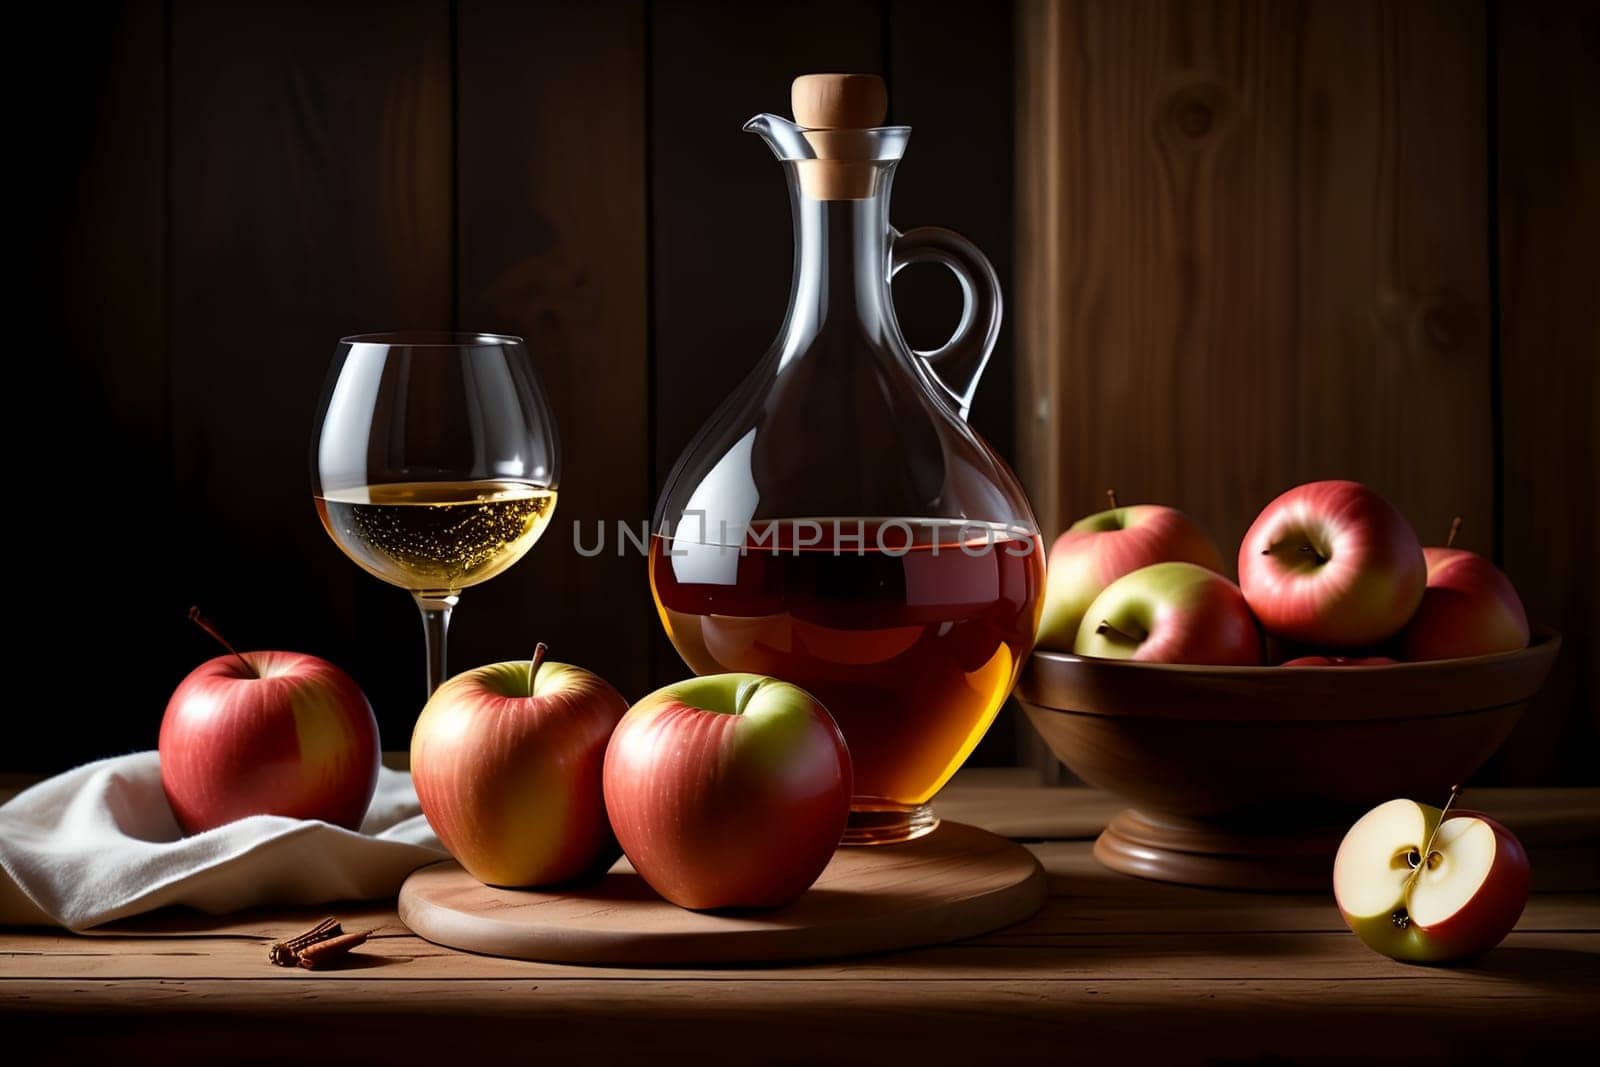 homemade apple wine in a glass and in a decanter on a background of green apples .